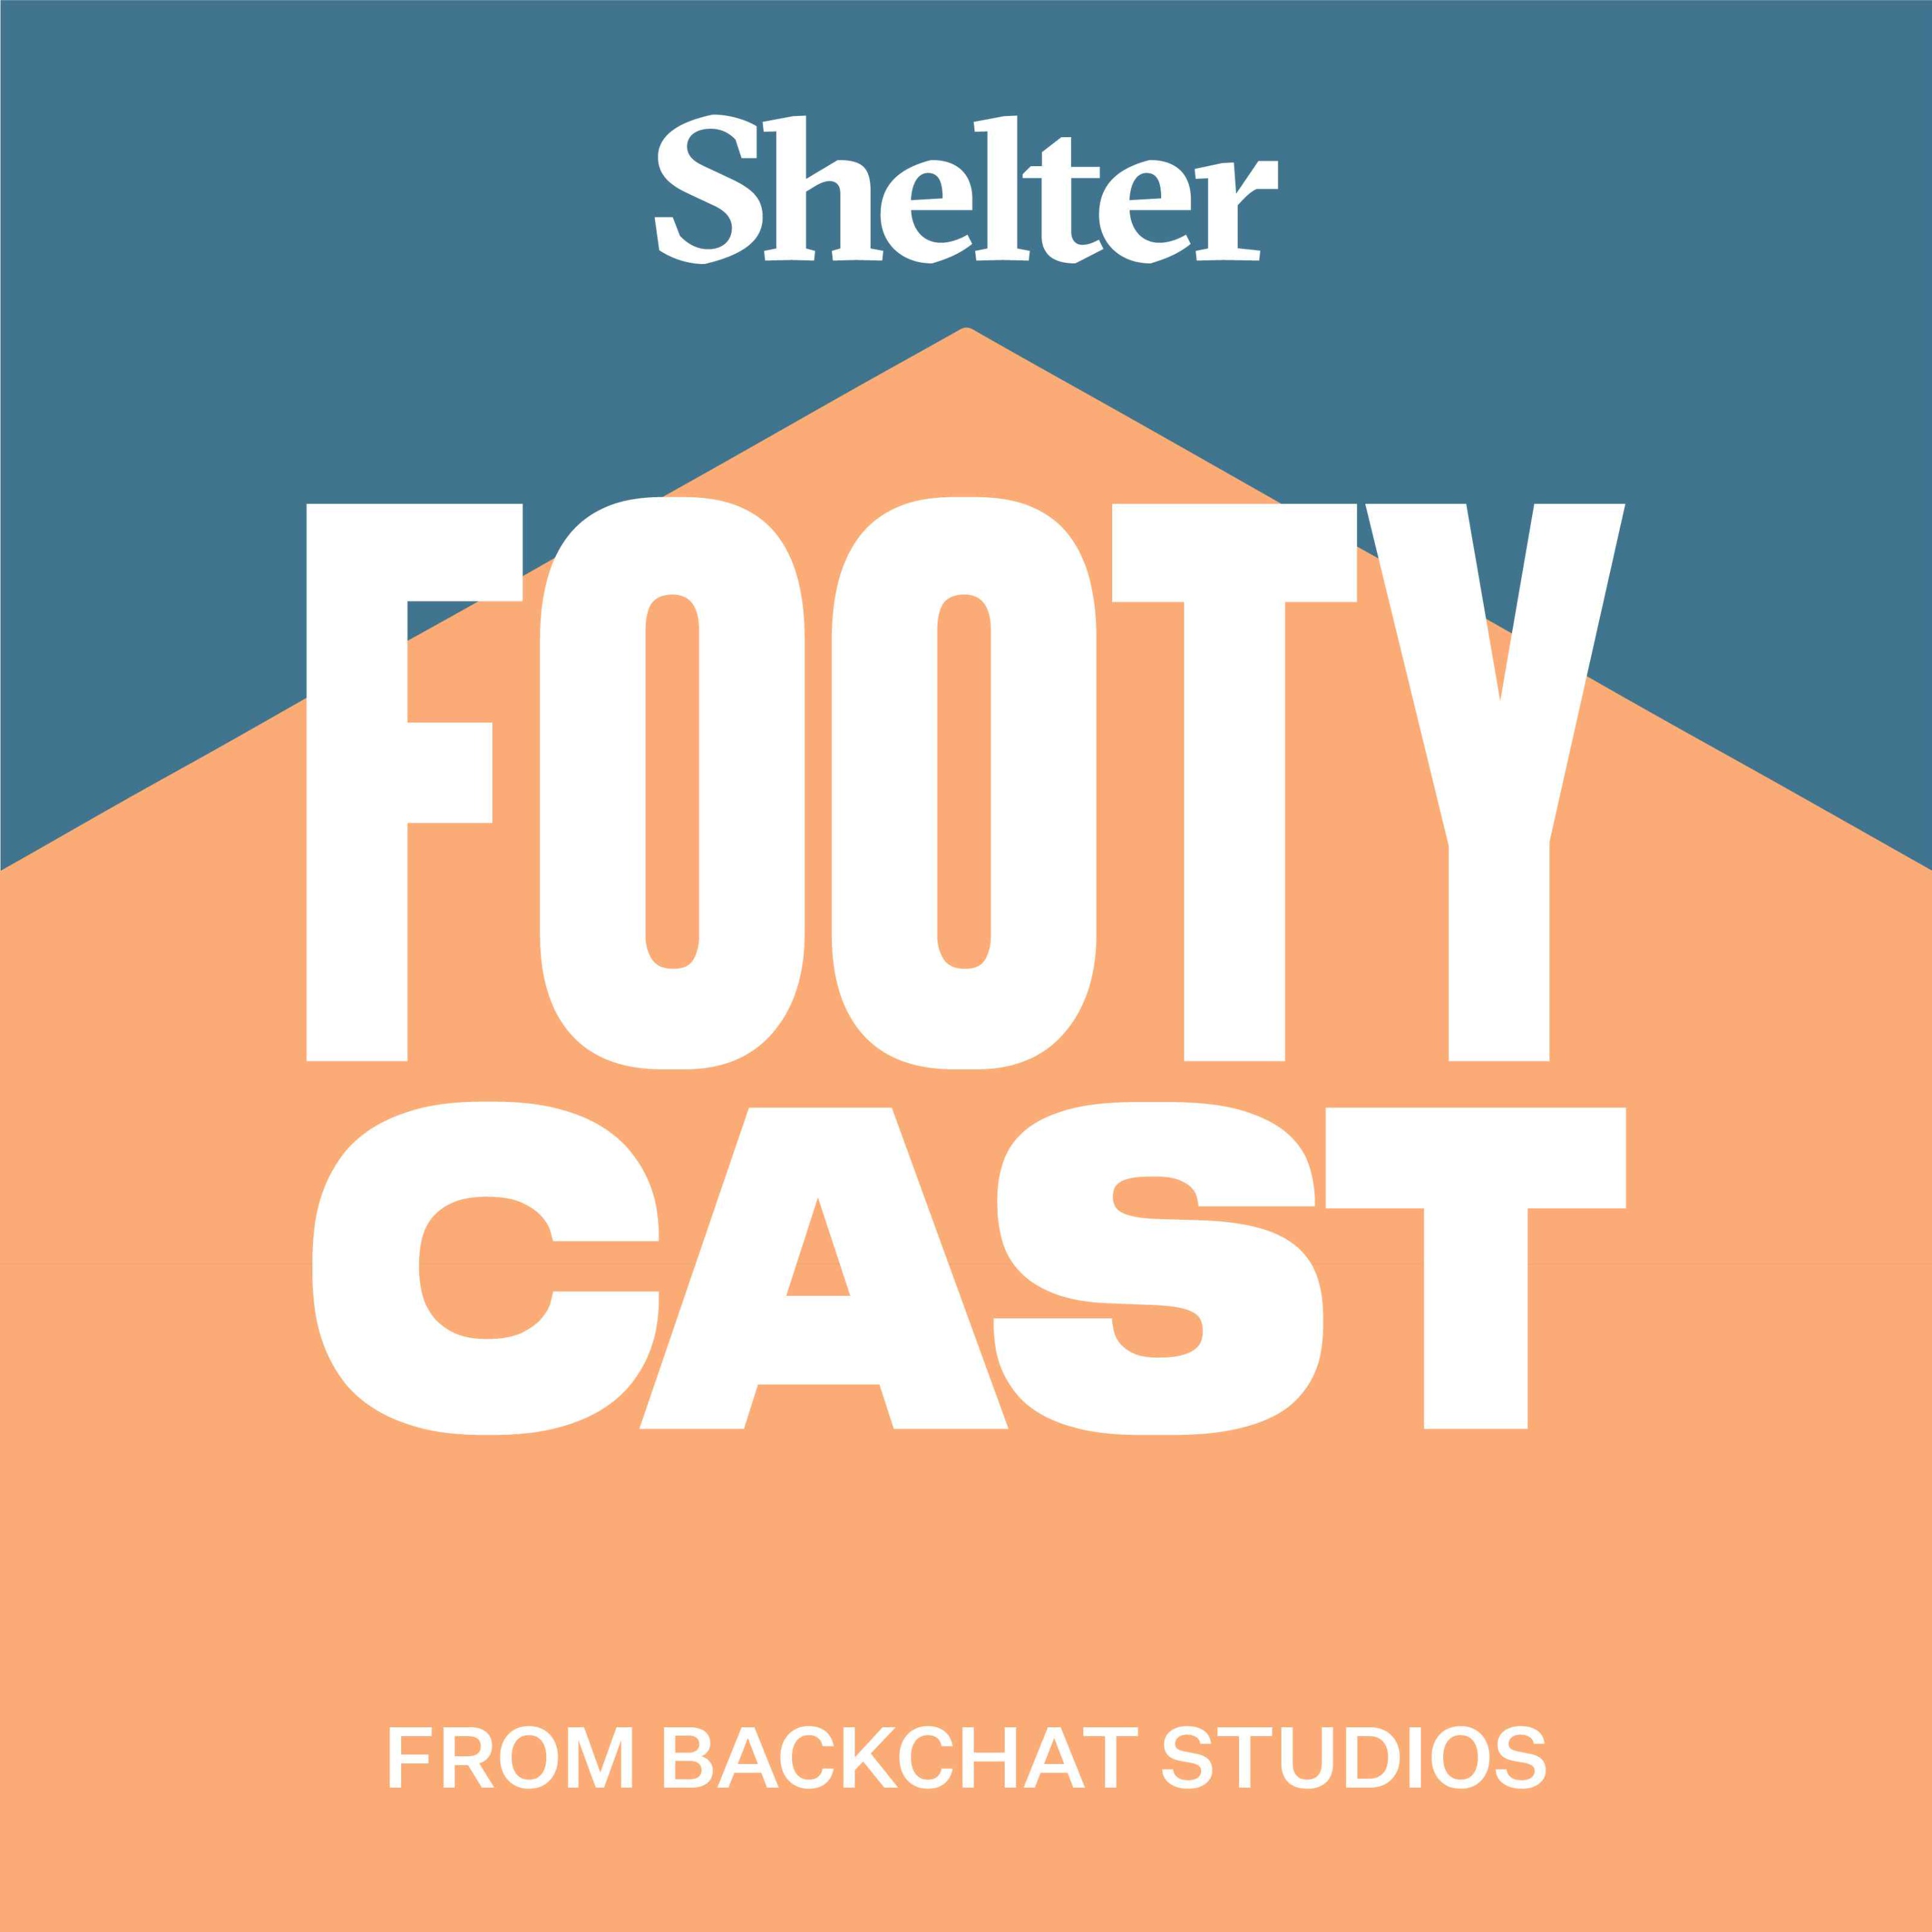 Shelter FootyCast Full Trade Week Review